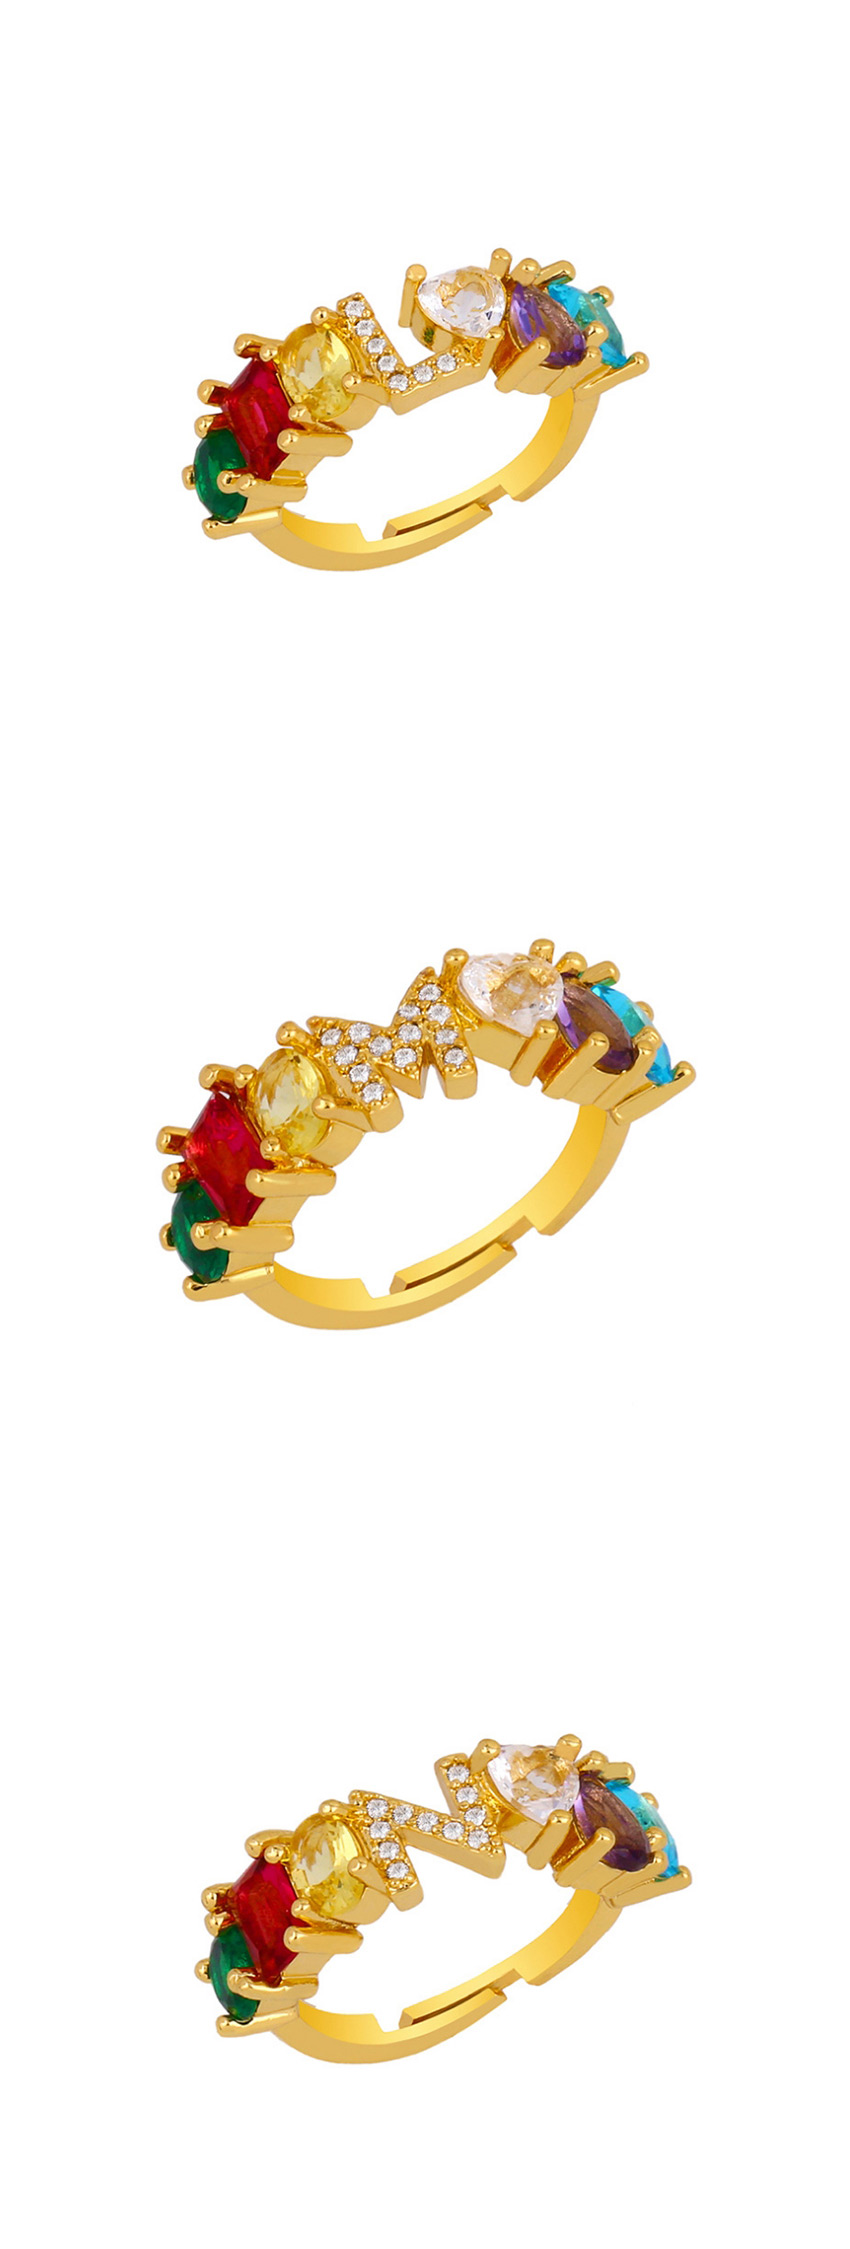 Fashion Z Gold Heart-shaped Adjustable Ring With Colorful Diamond Letters,Rings